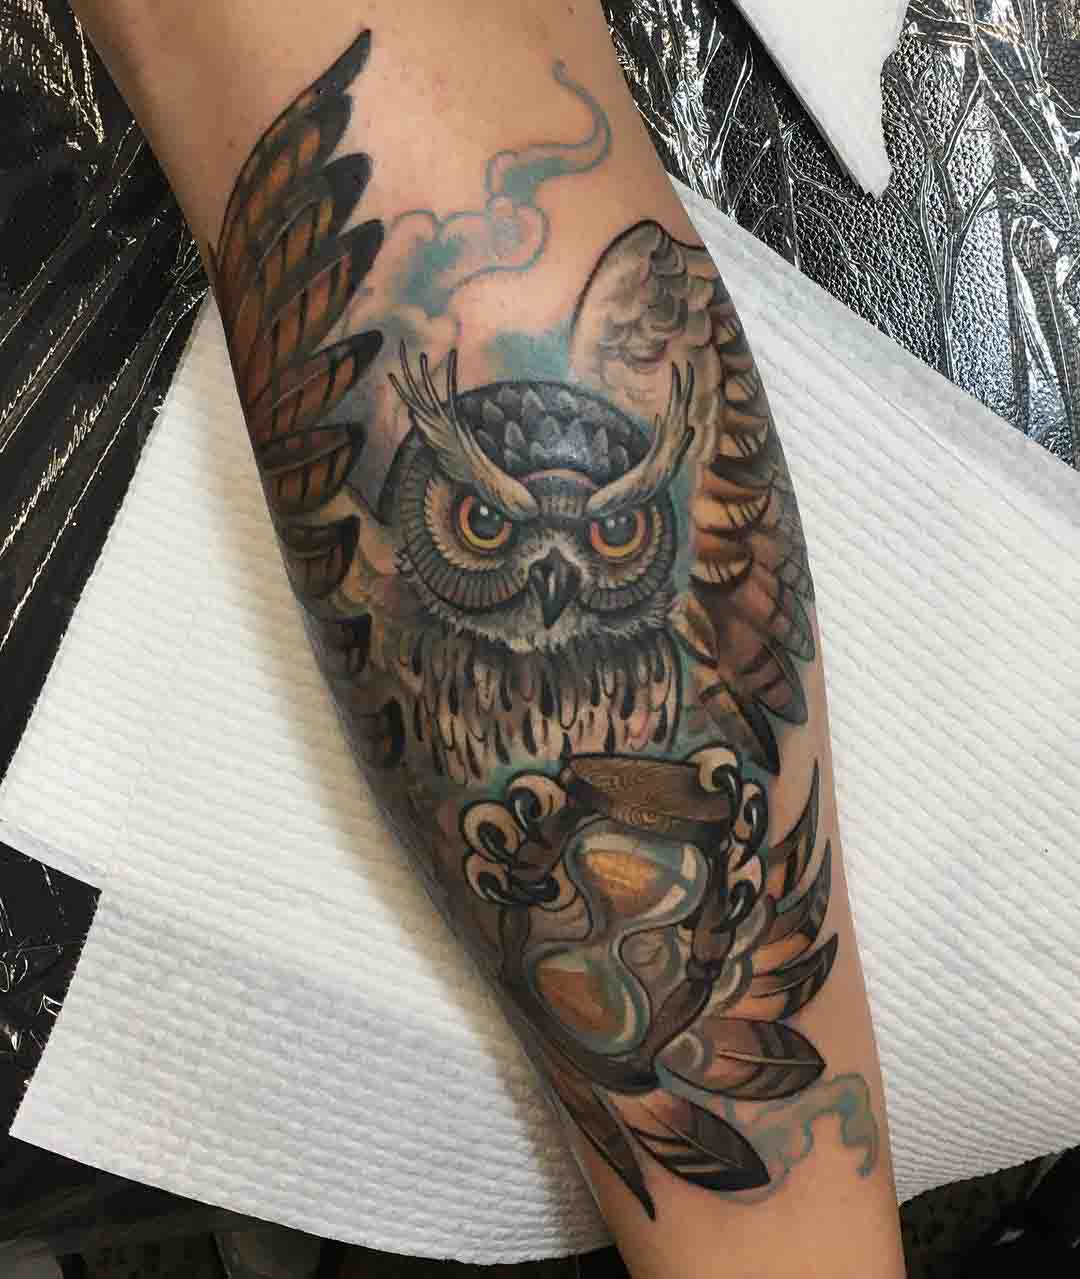 Owl with Hourglass Tattoo on Calf - Best Tattoo Ideas Gallery